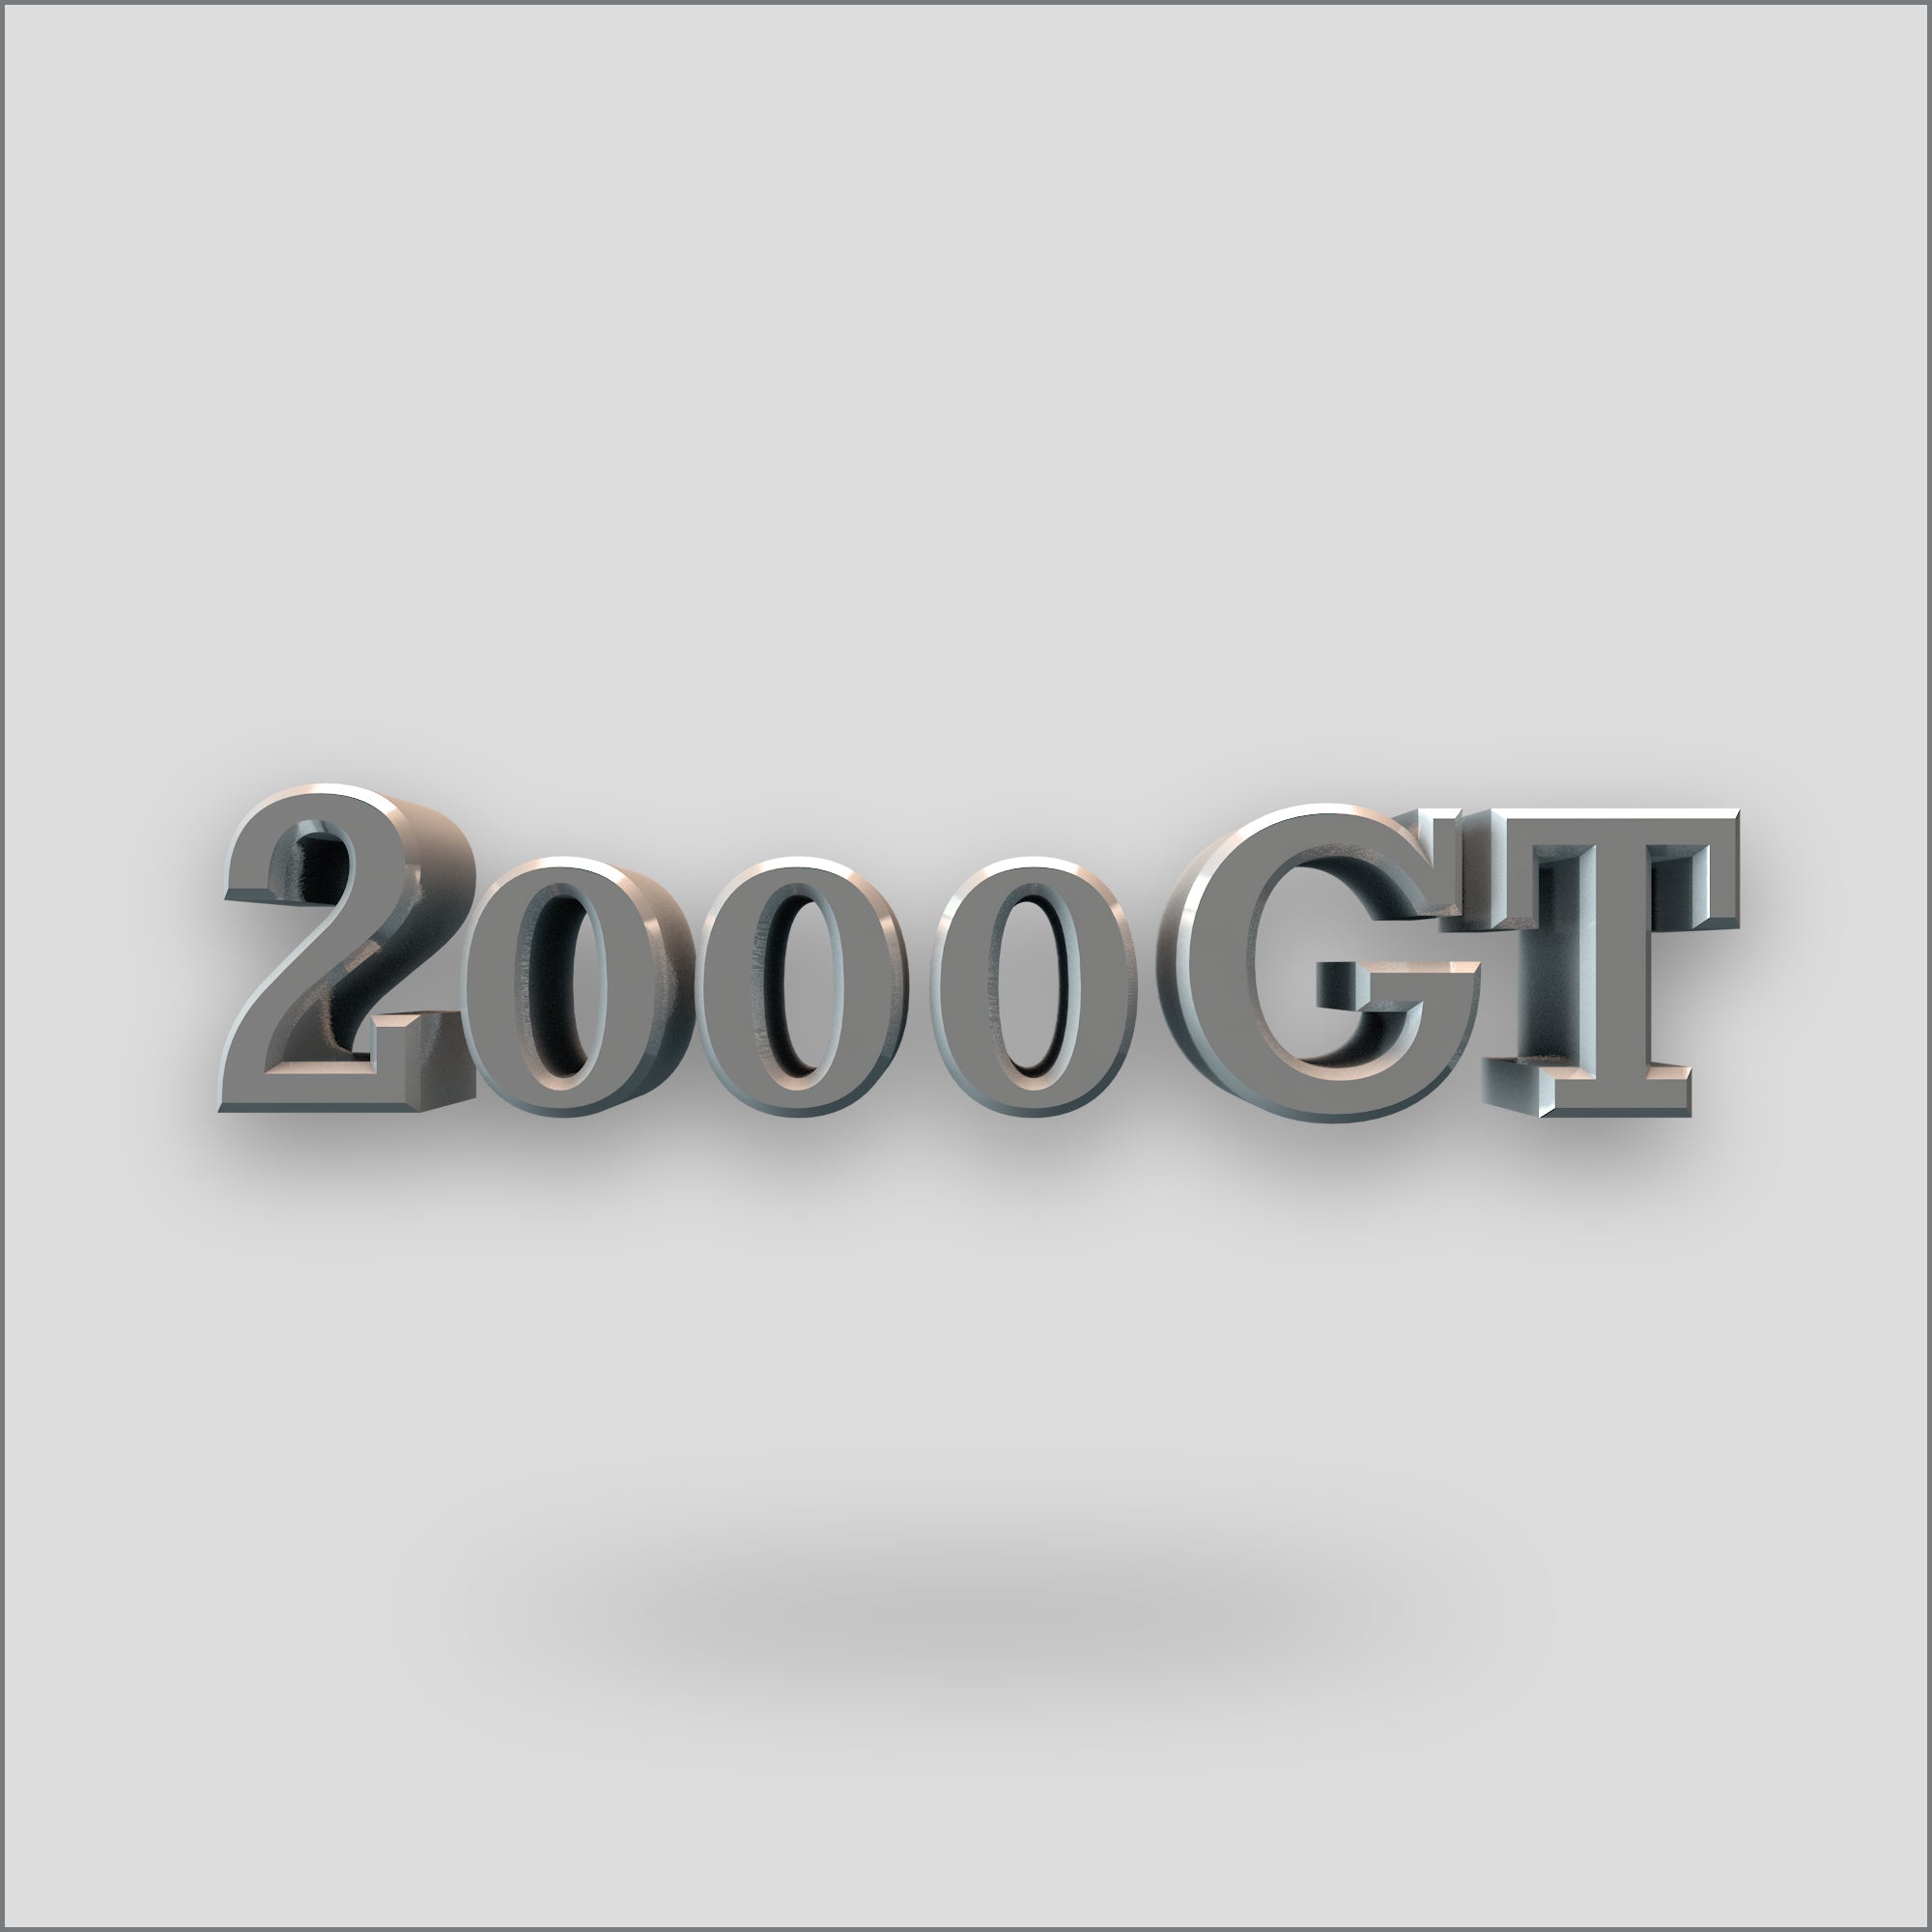 2000GT PATCHES